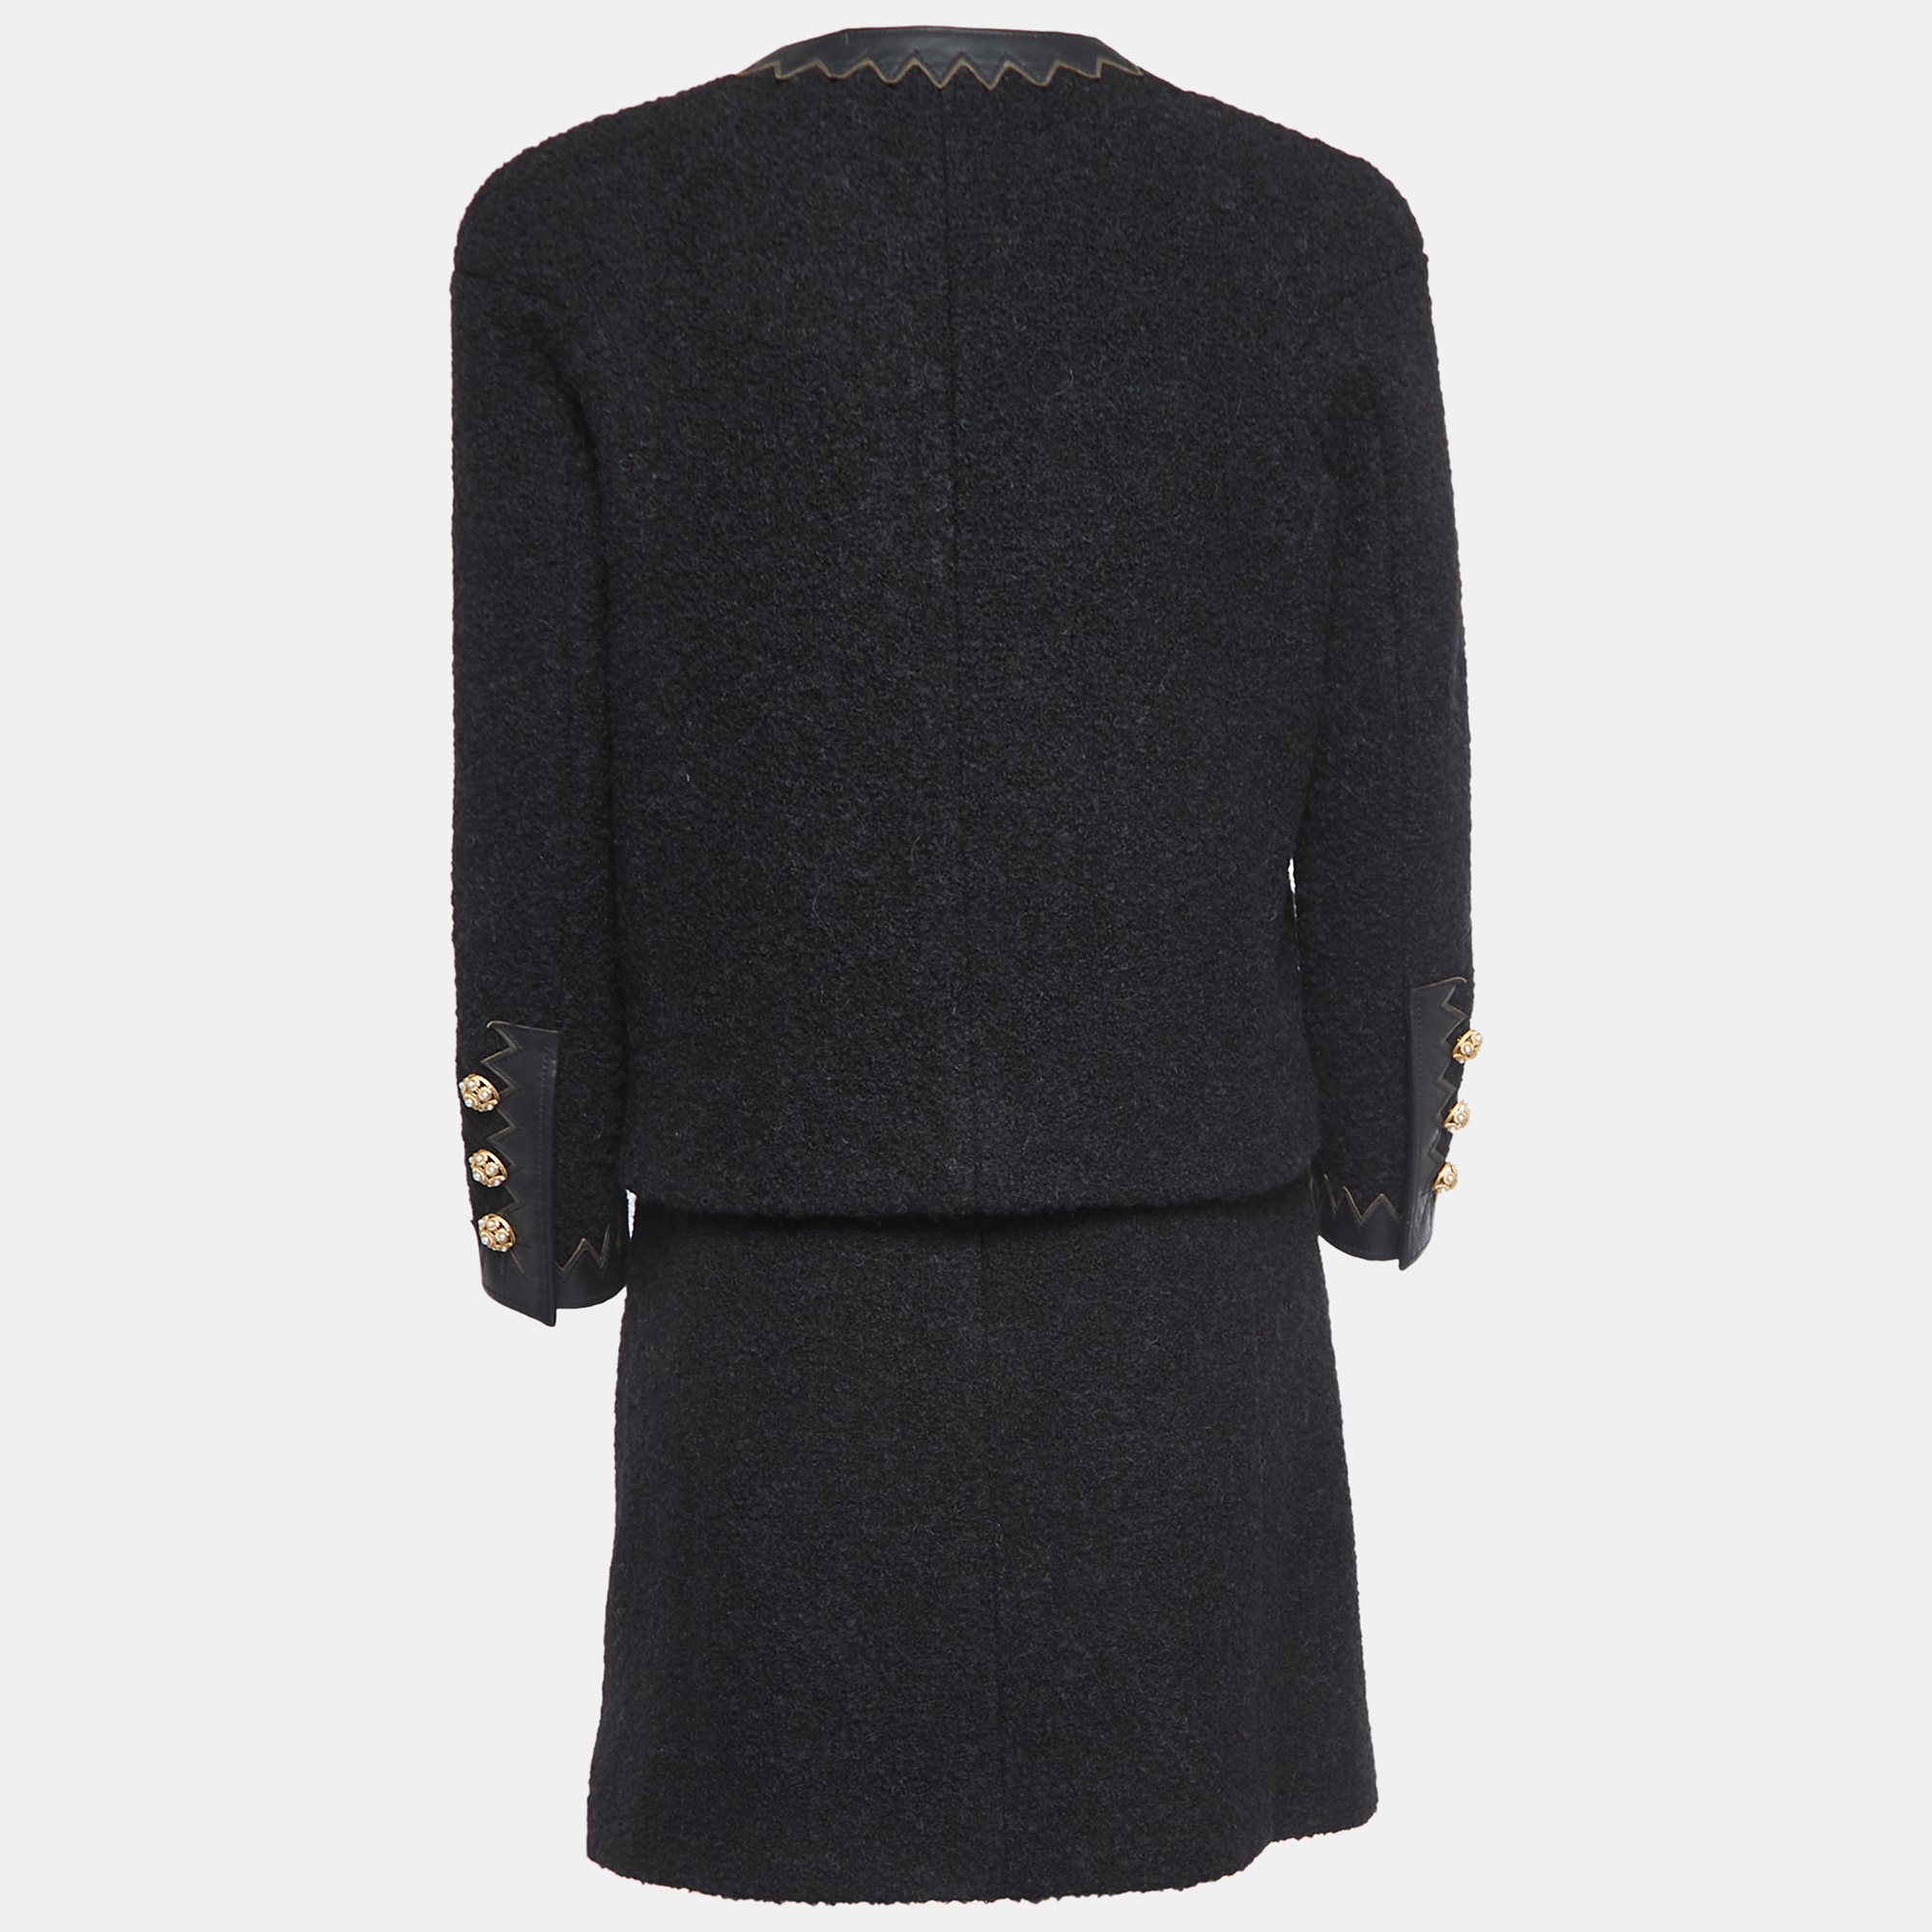 

Chanel Black Boucle Wool Leather Trimmed Salzburg Skirt Suit